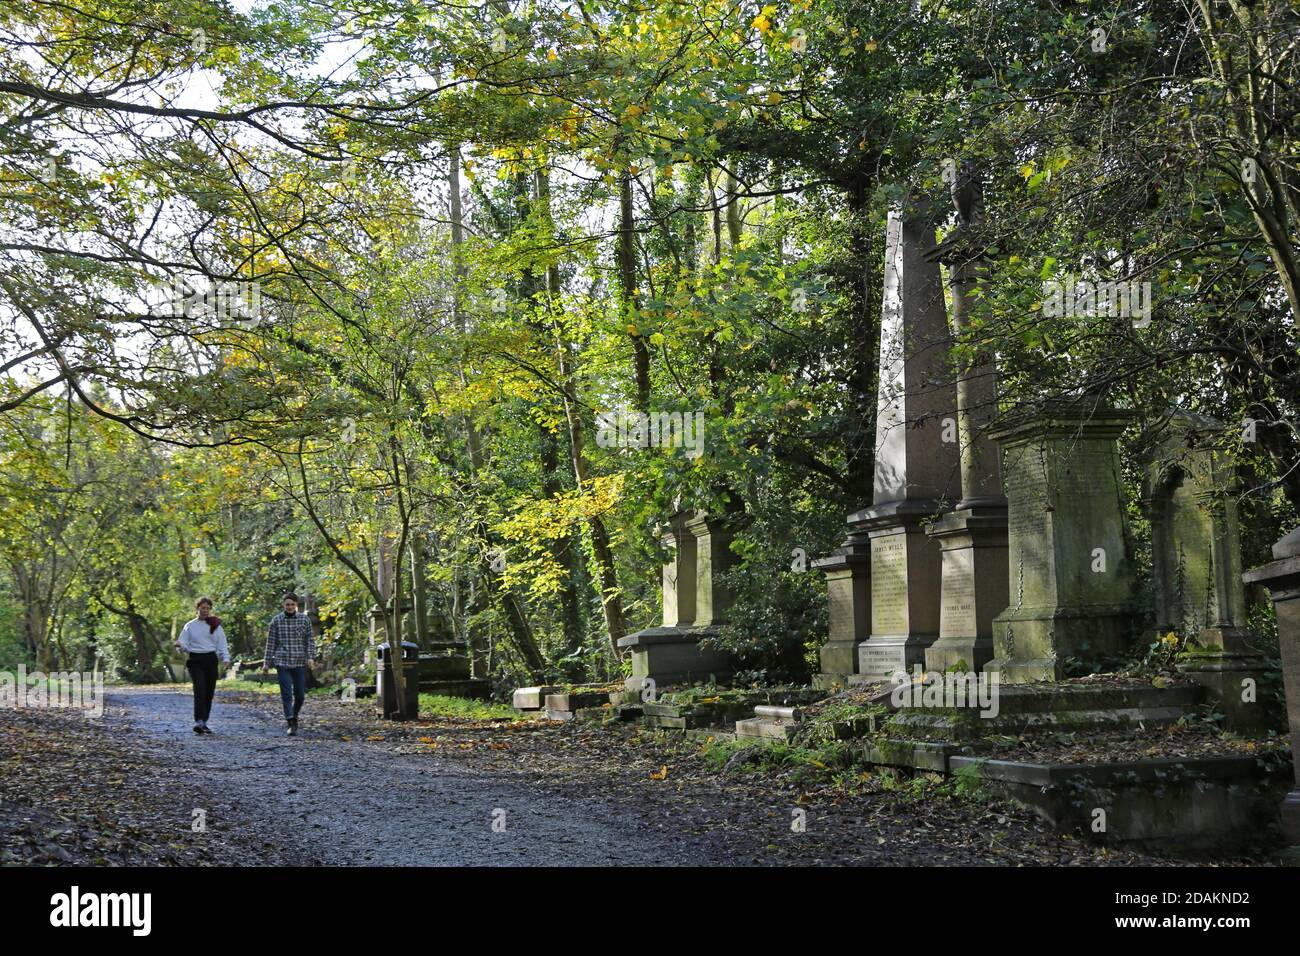 A couple walk in Nunhead Cemetery, south London, UK. An impressive Victorian cemetery now wild and overgrown, but popular with local people. Stock Photo